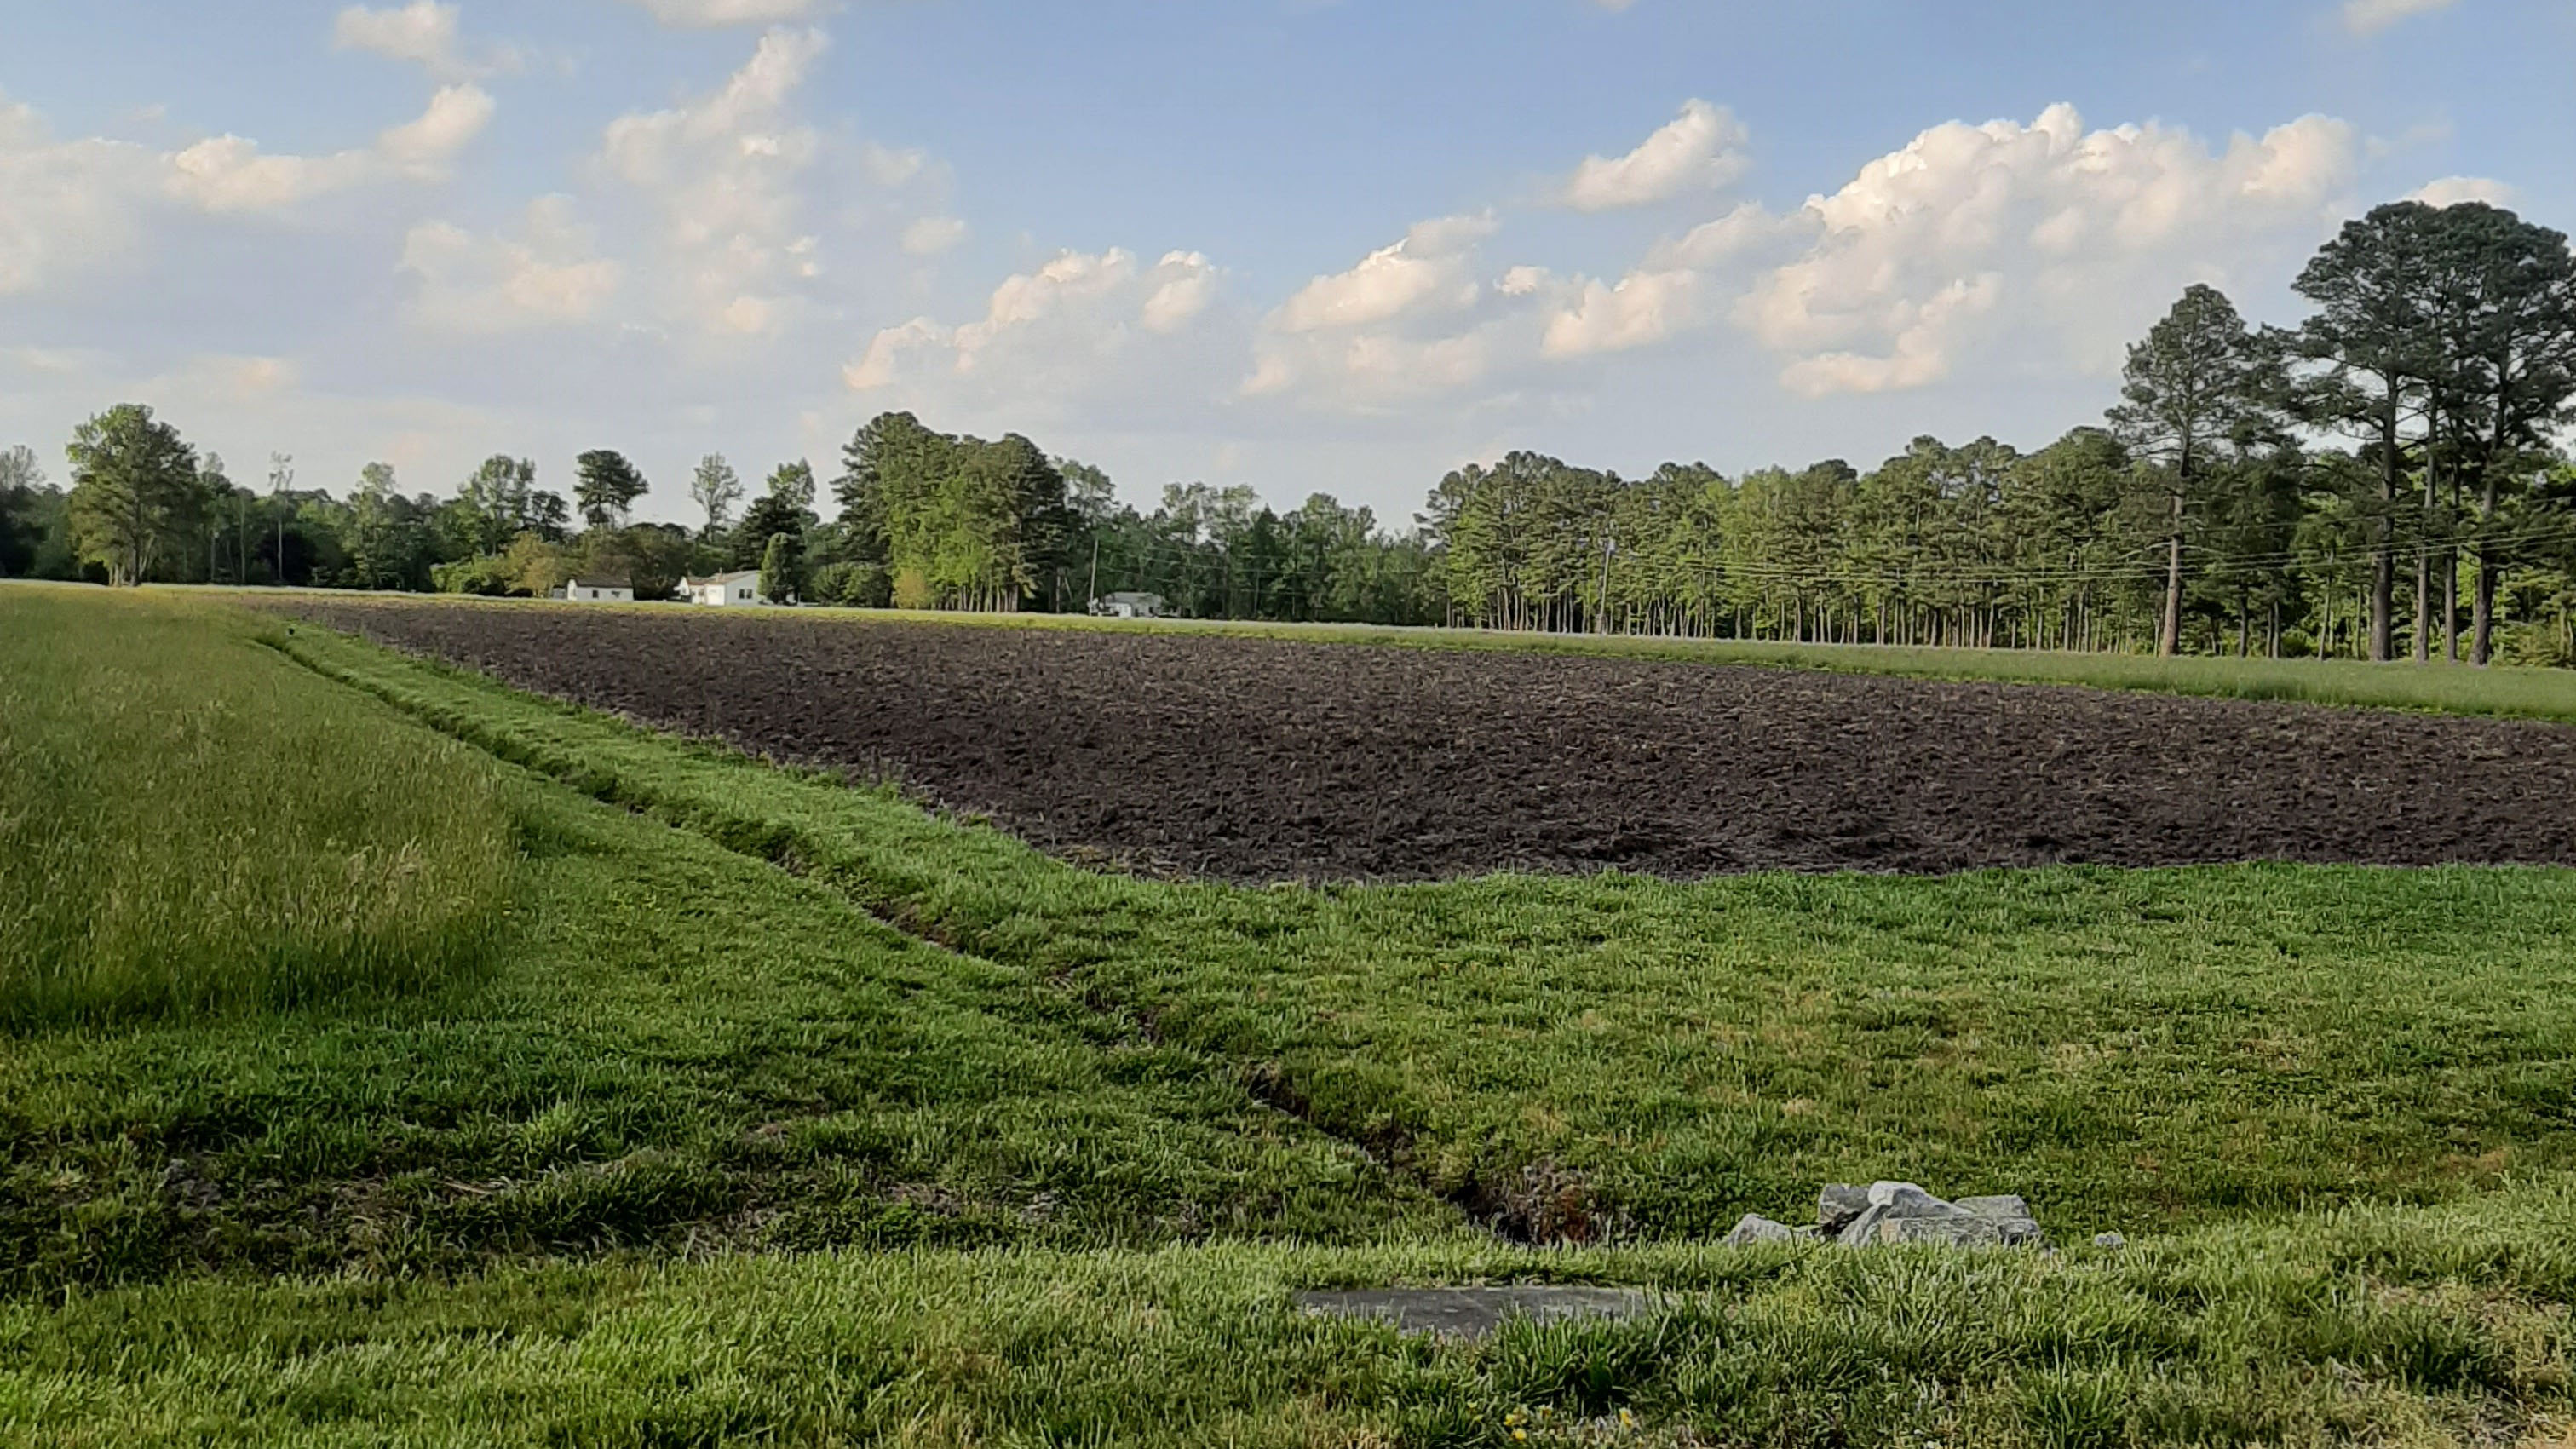 The Sunray community in Chesapeake, near where the Virginia Reliability Project would replace a pipeline. (Image courtesy of Lynn Godfrey)